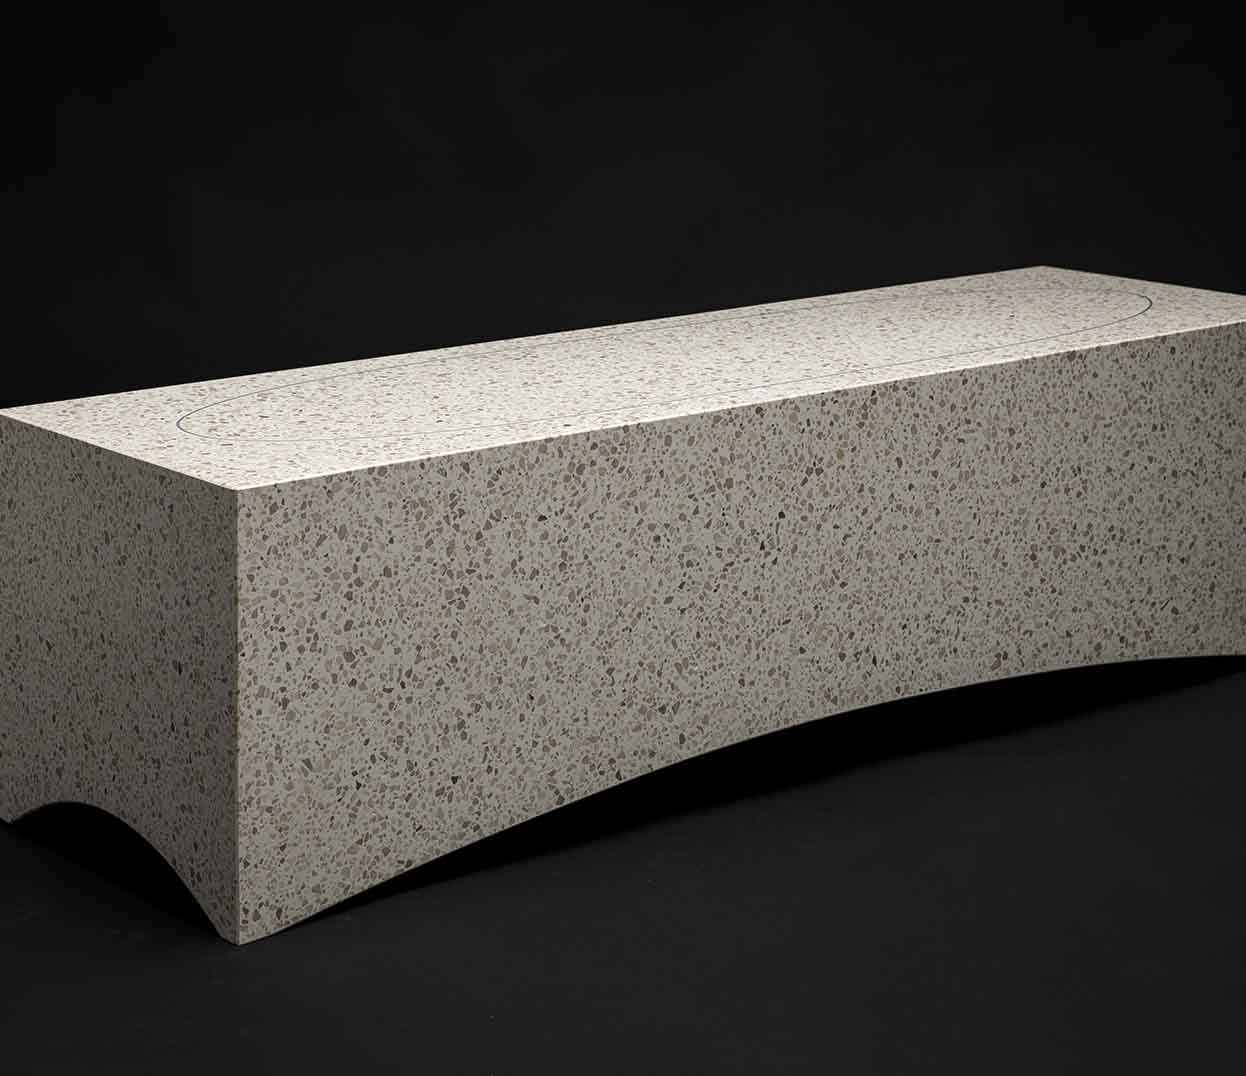 display table made of terrazzo